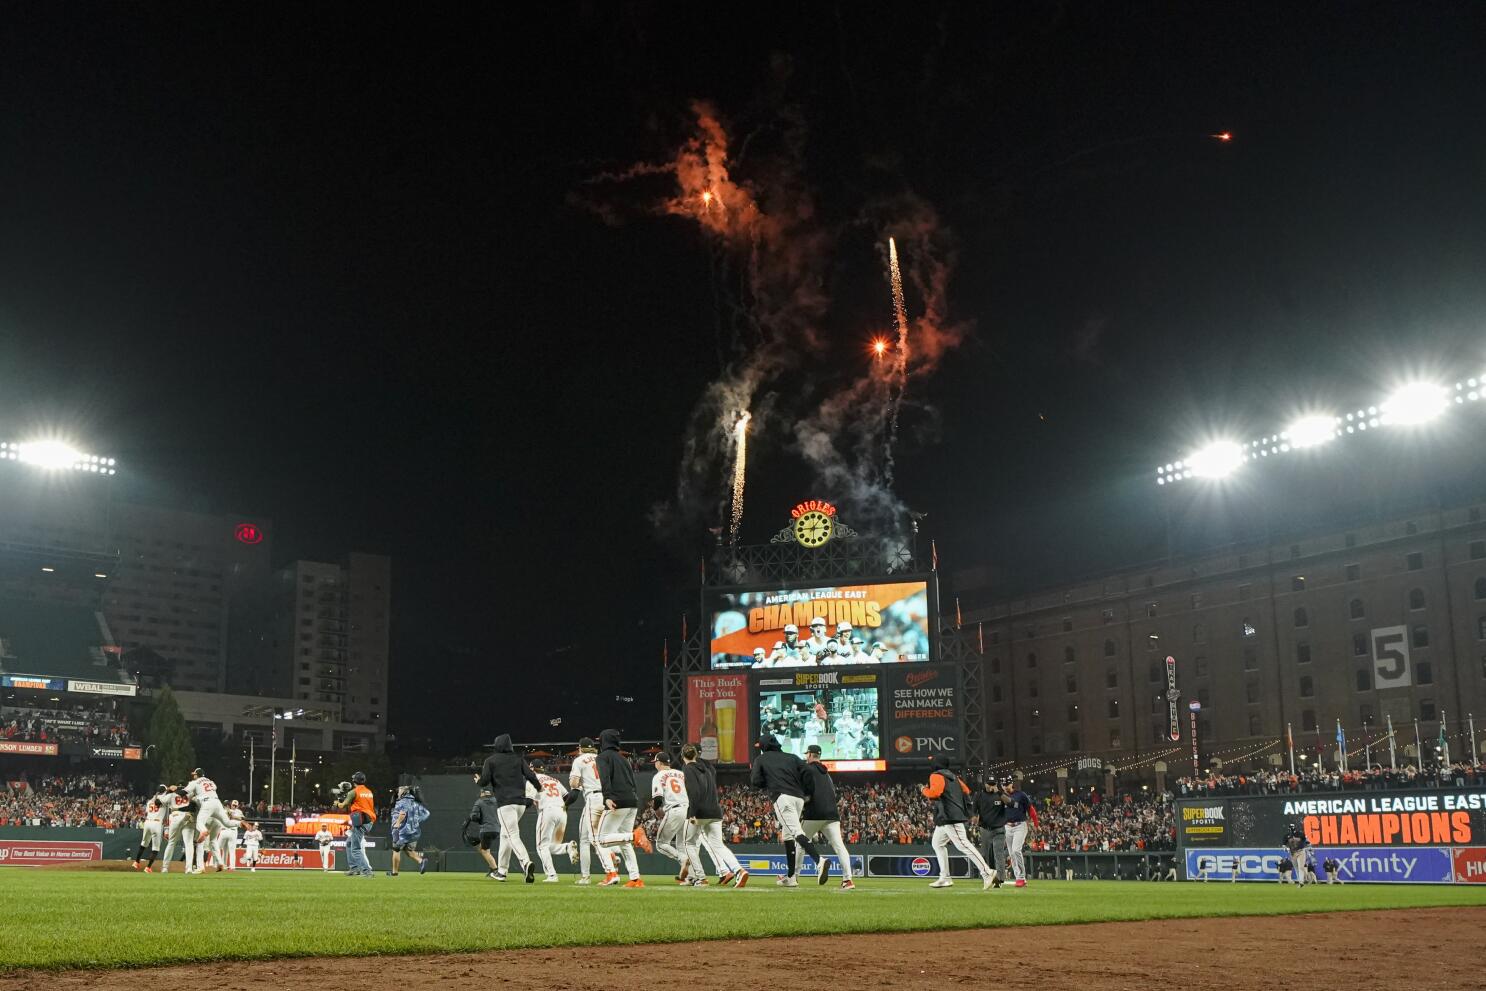 Baltimore Orioles - Announcing our 2017 Promotions & Special